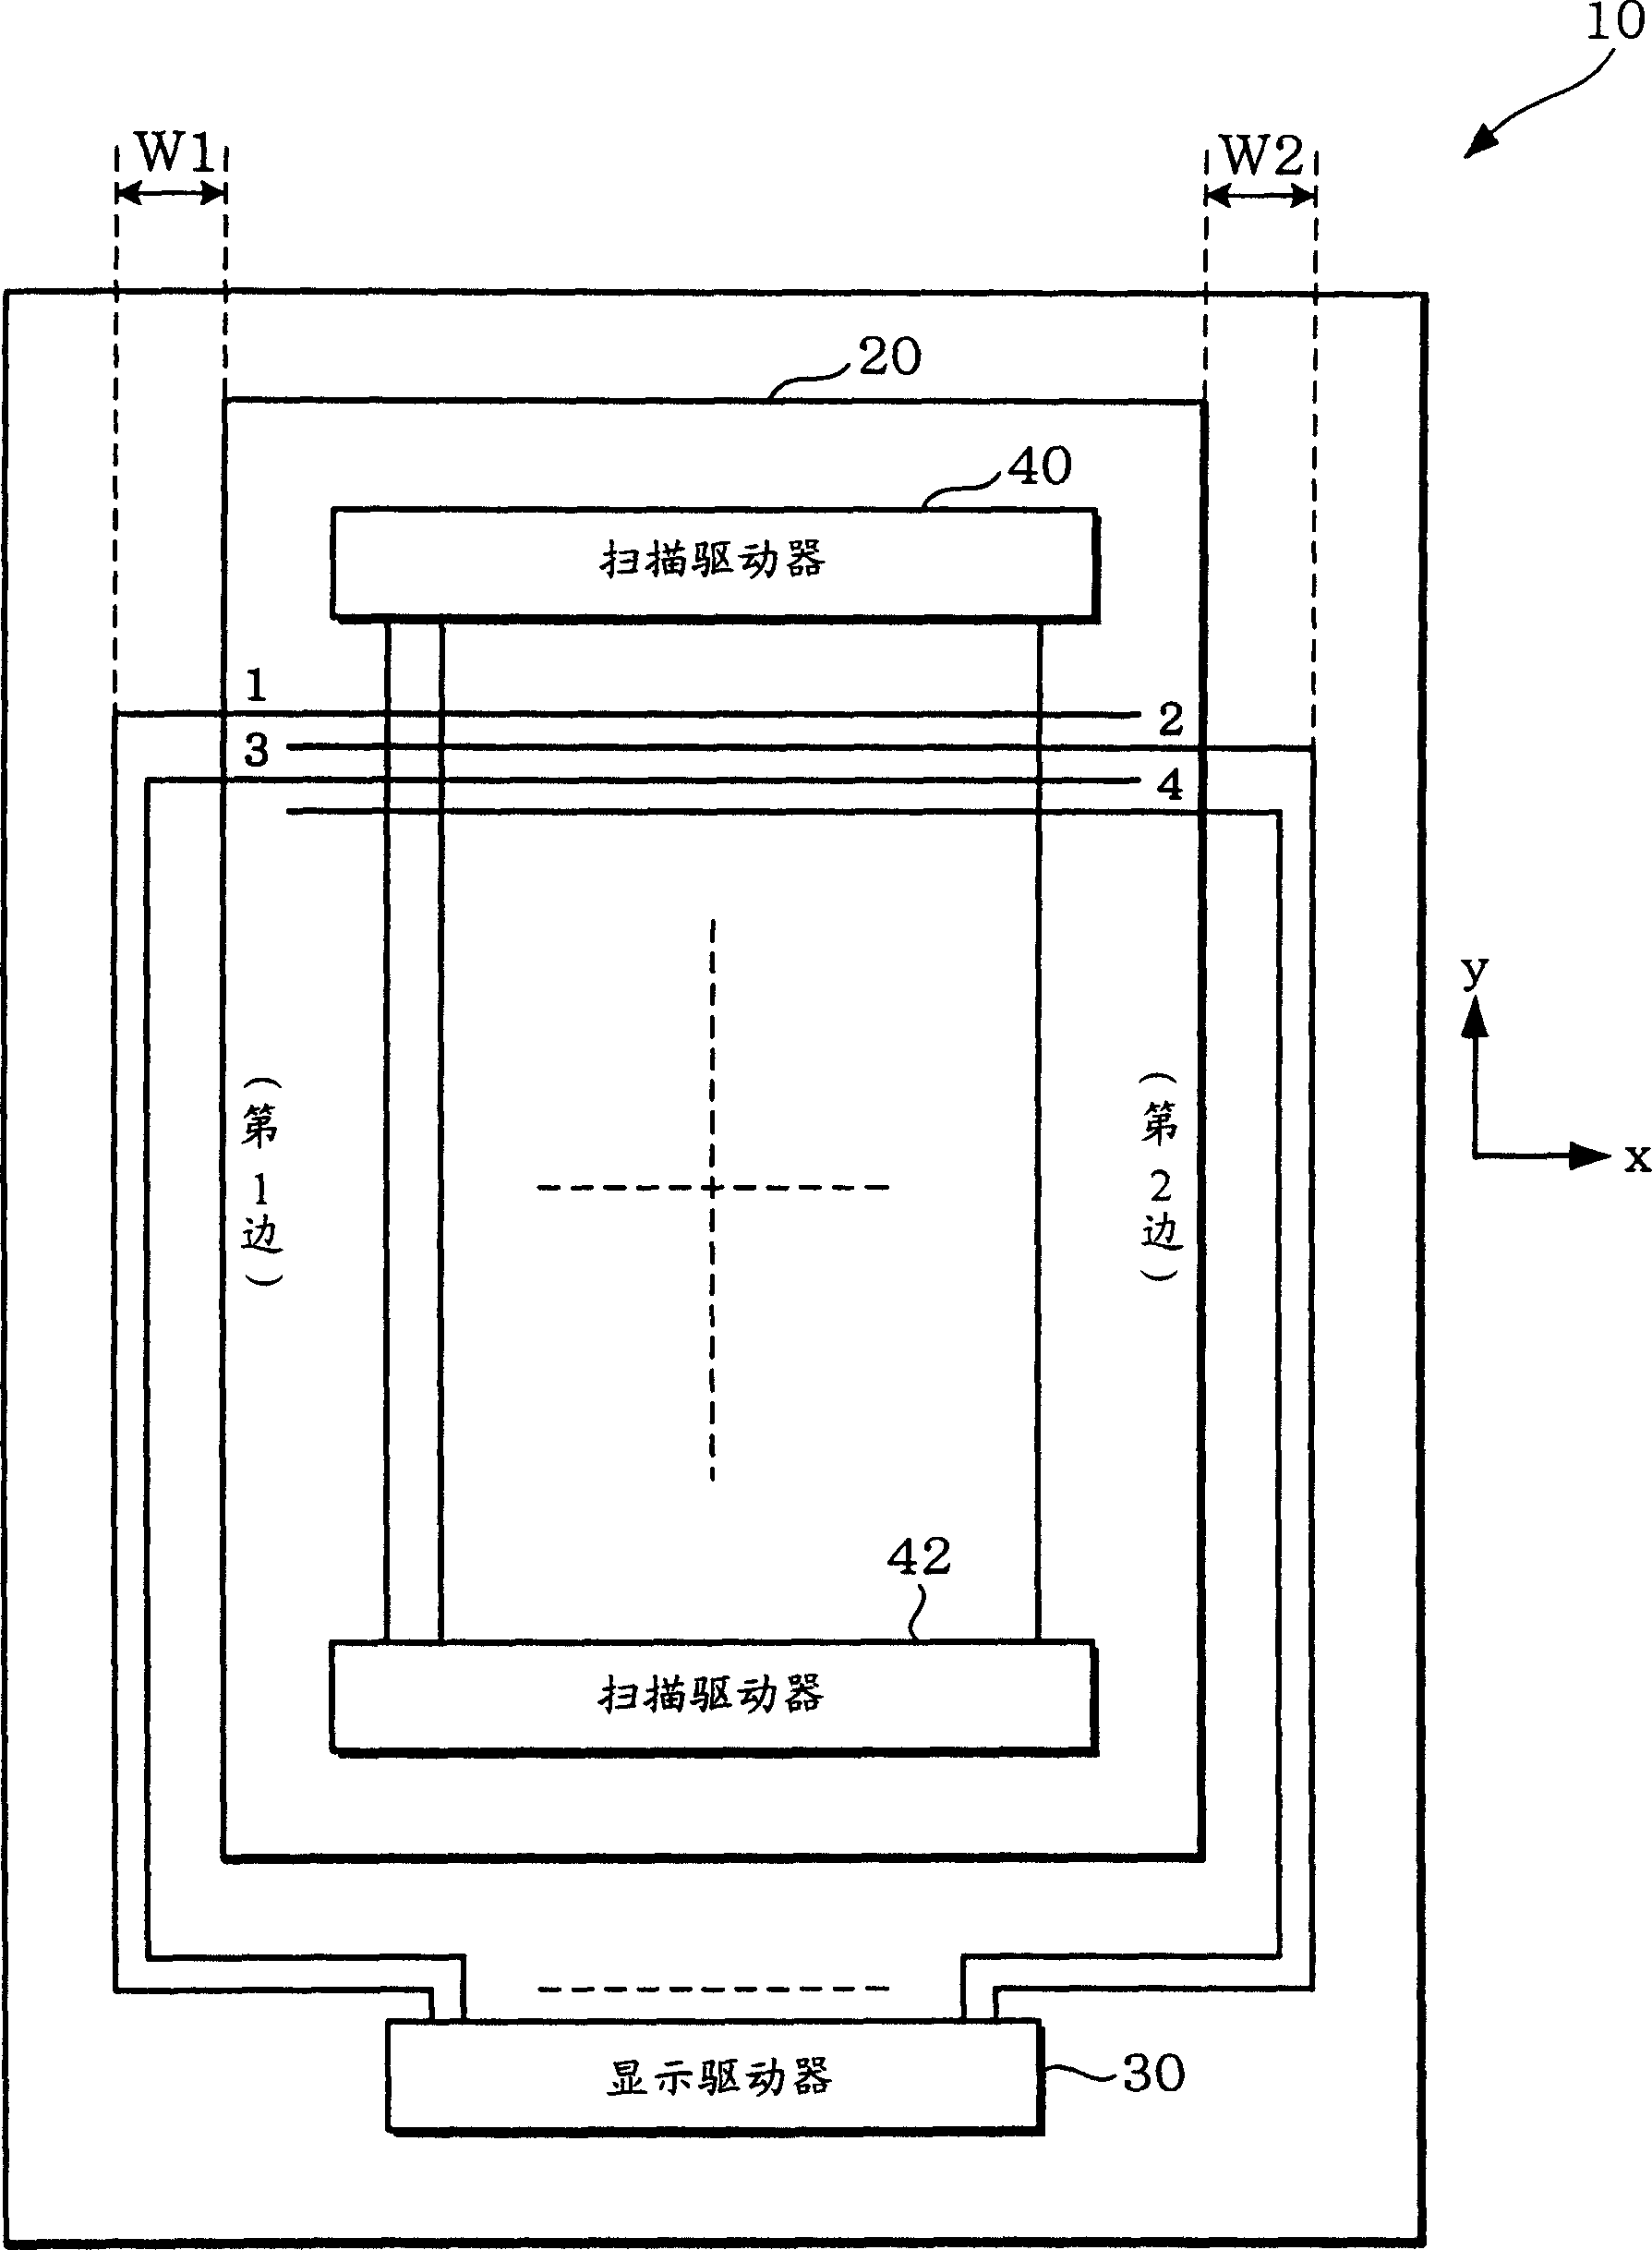 Displaying driver and photoelectric device